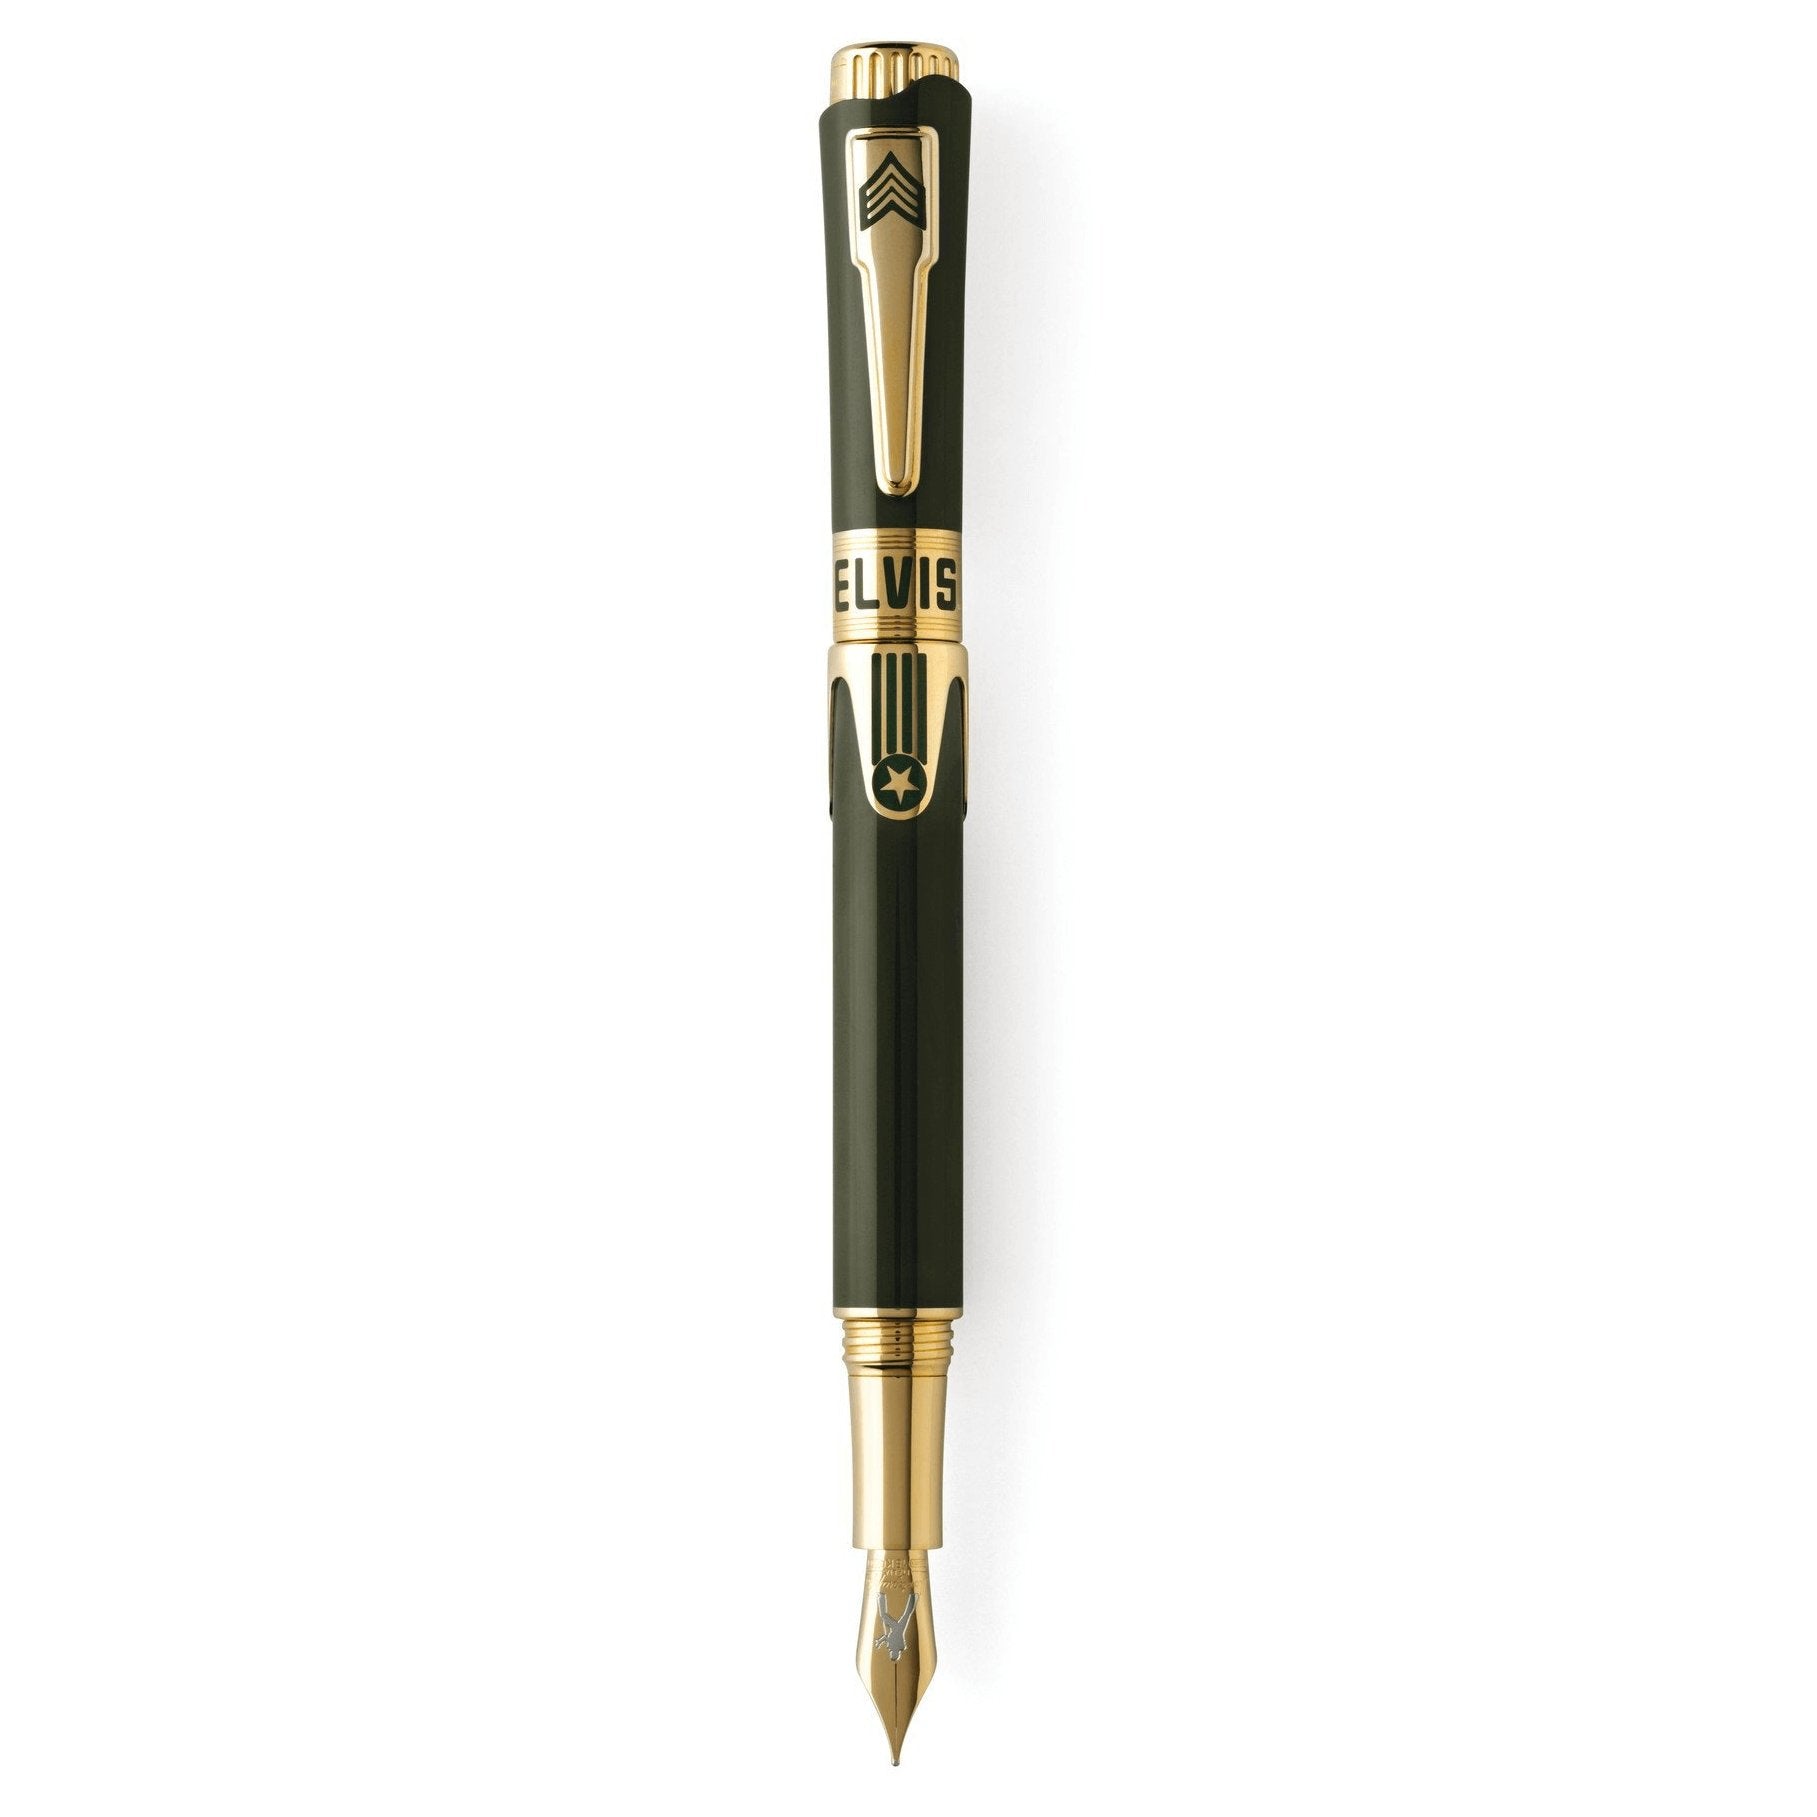 Montegrappa Pen Icons Elvis Presley Fountain Pen Medium Tip Green ISICE3YG - Watches & Crystals